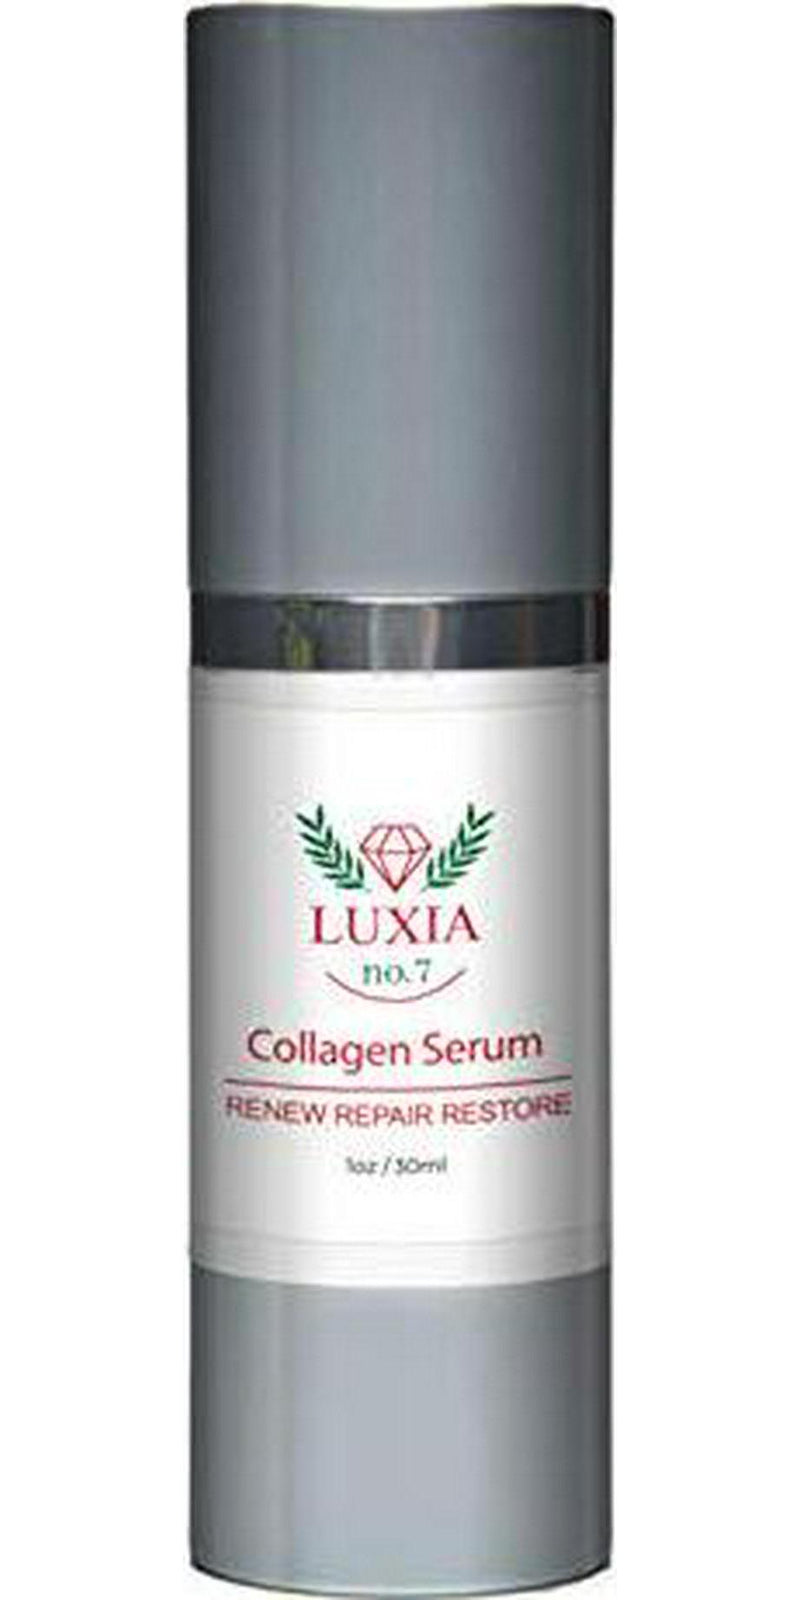 Luxia Skincare- Collagen Serum-Luxury Anti Aging Face Serum Treatment Formula for Men and Women. Effective for Fine Lines and Under Eye Wrinkles.